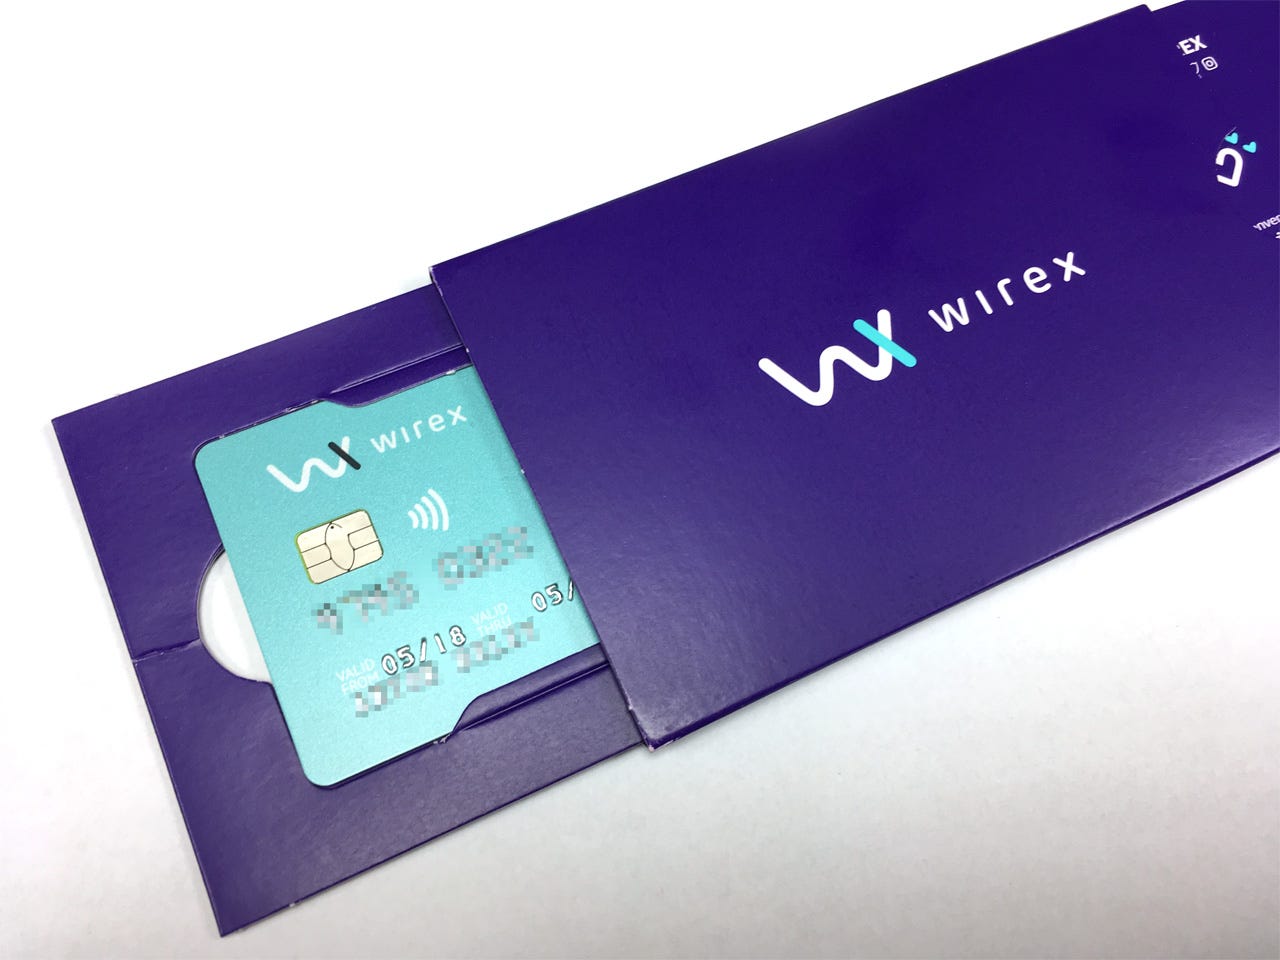 We Got Our Wirex Visa Debit Crypto Card, So Shopping Time - Crypto Mining  Blog